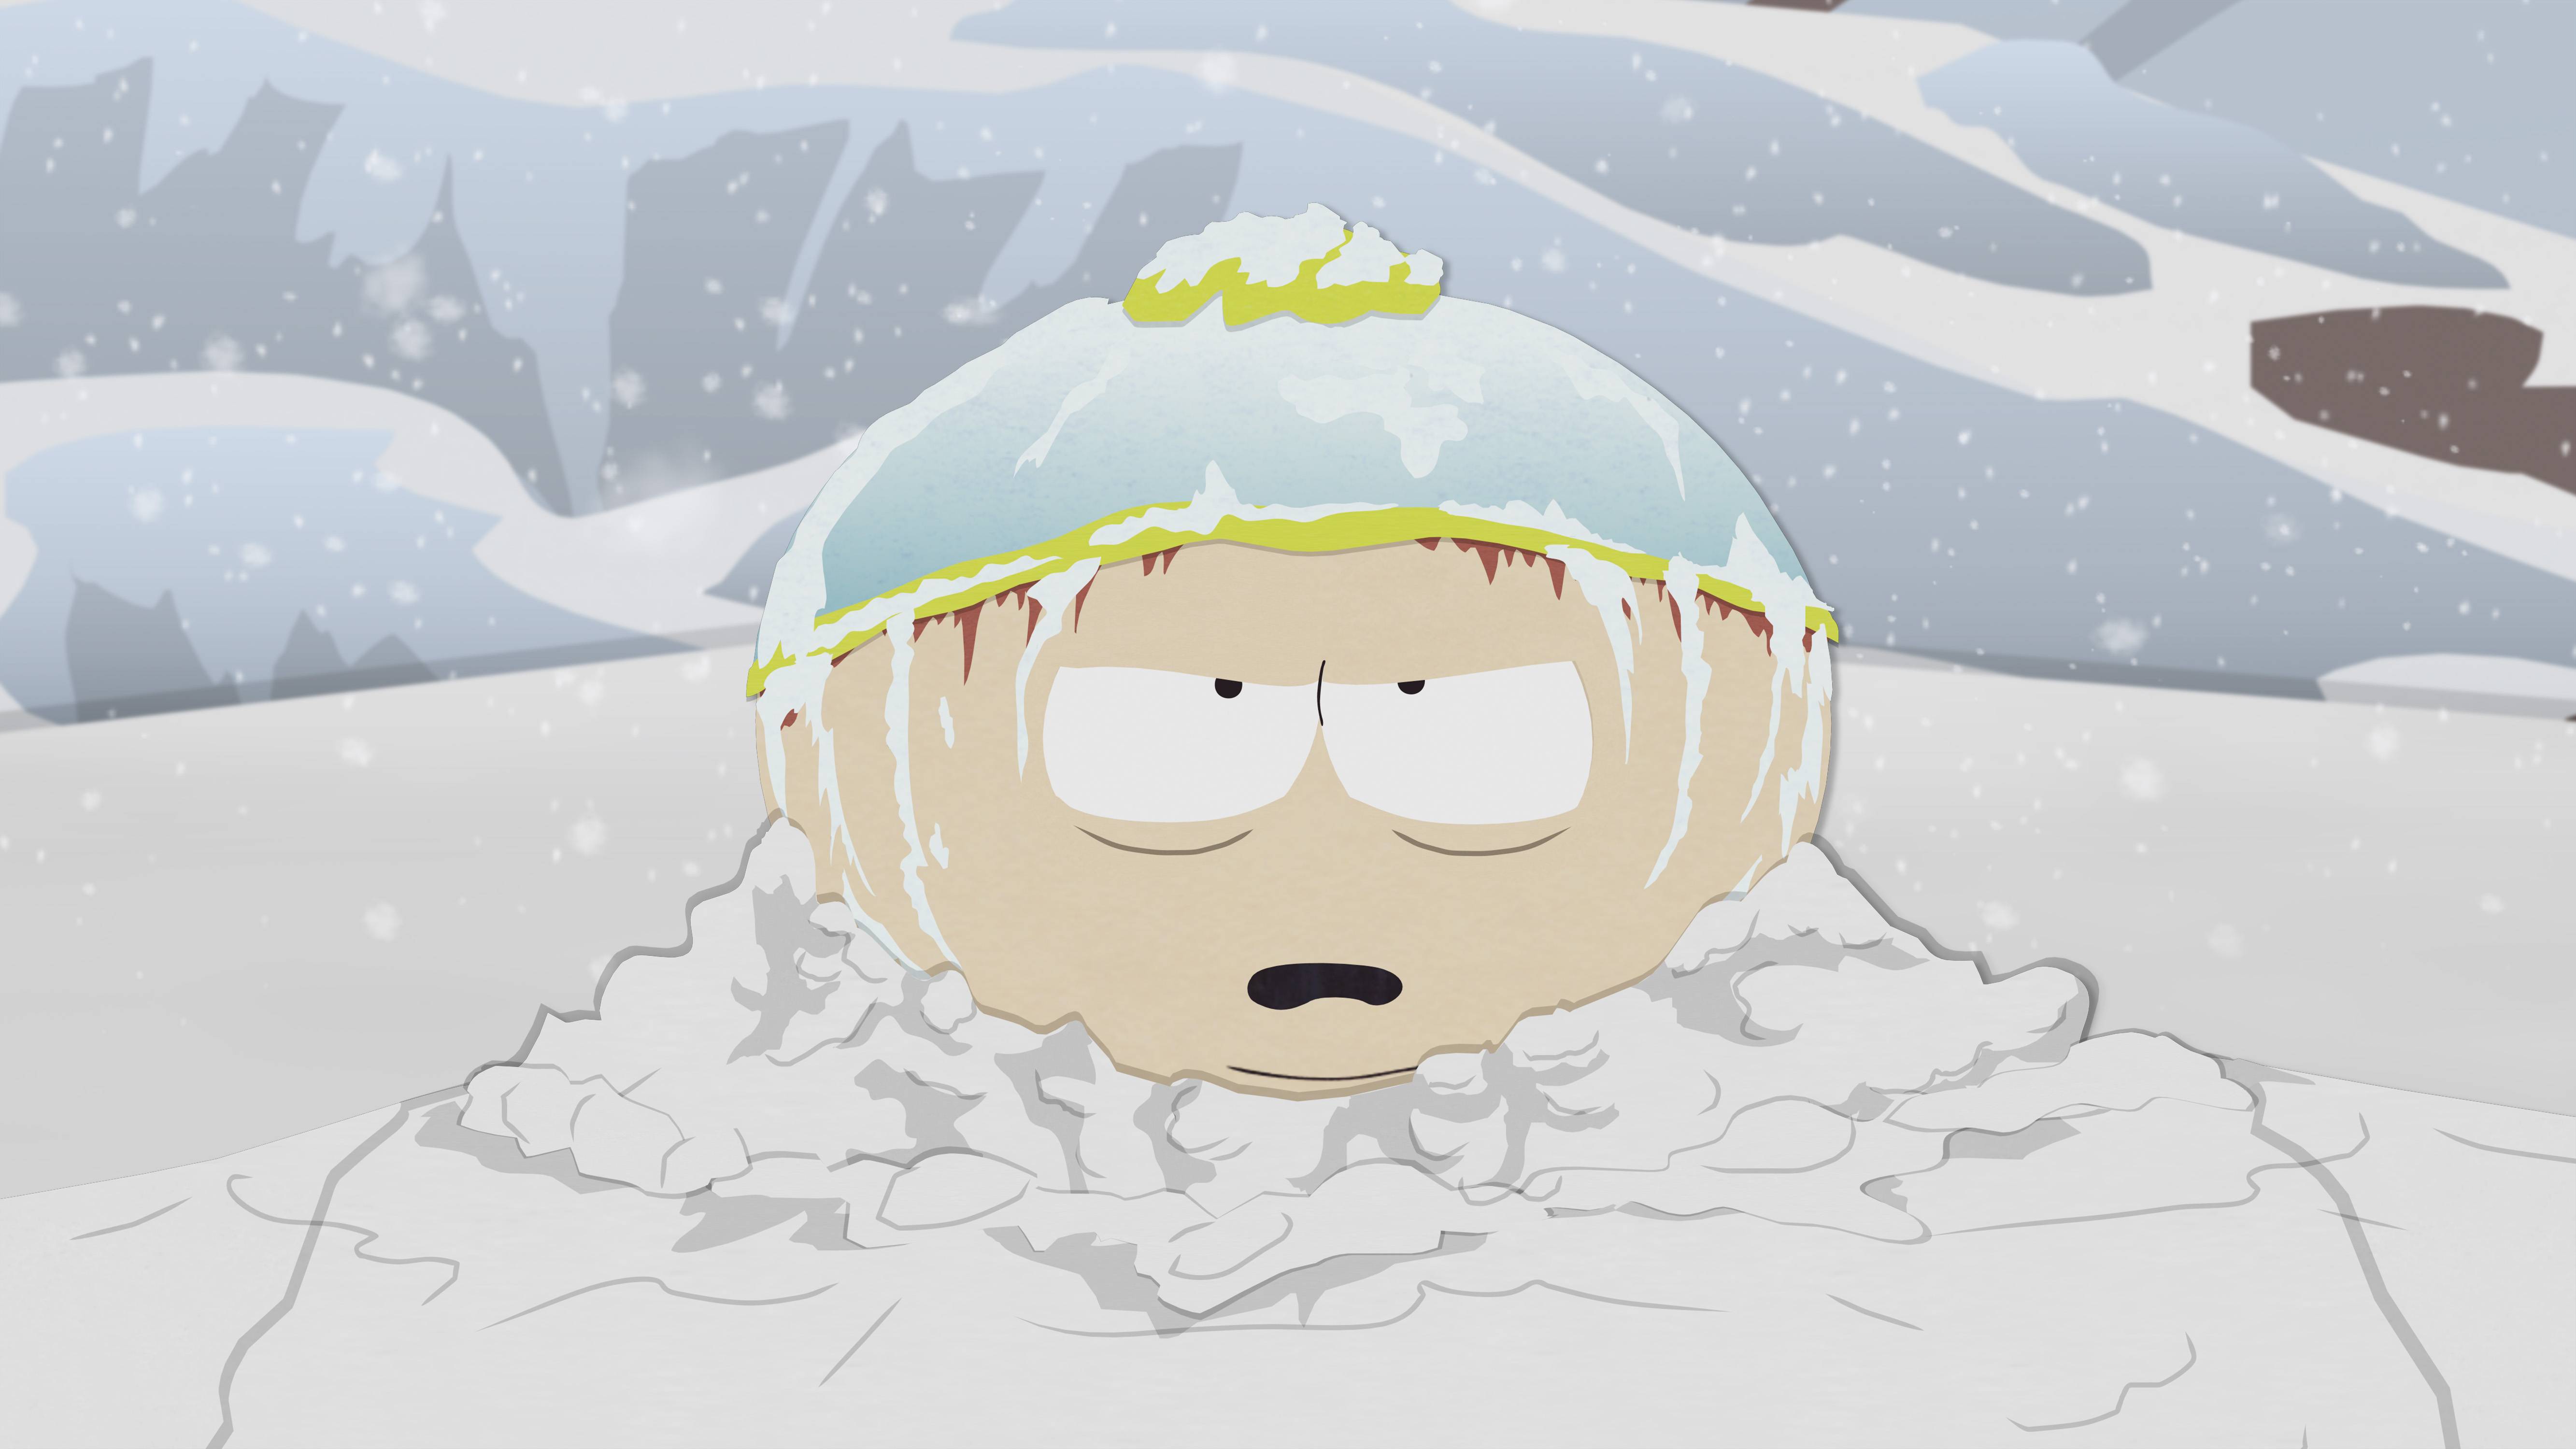 South Park Hell on Earth 2006 (TV Episode 2006) - IMDb